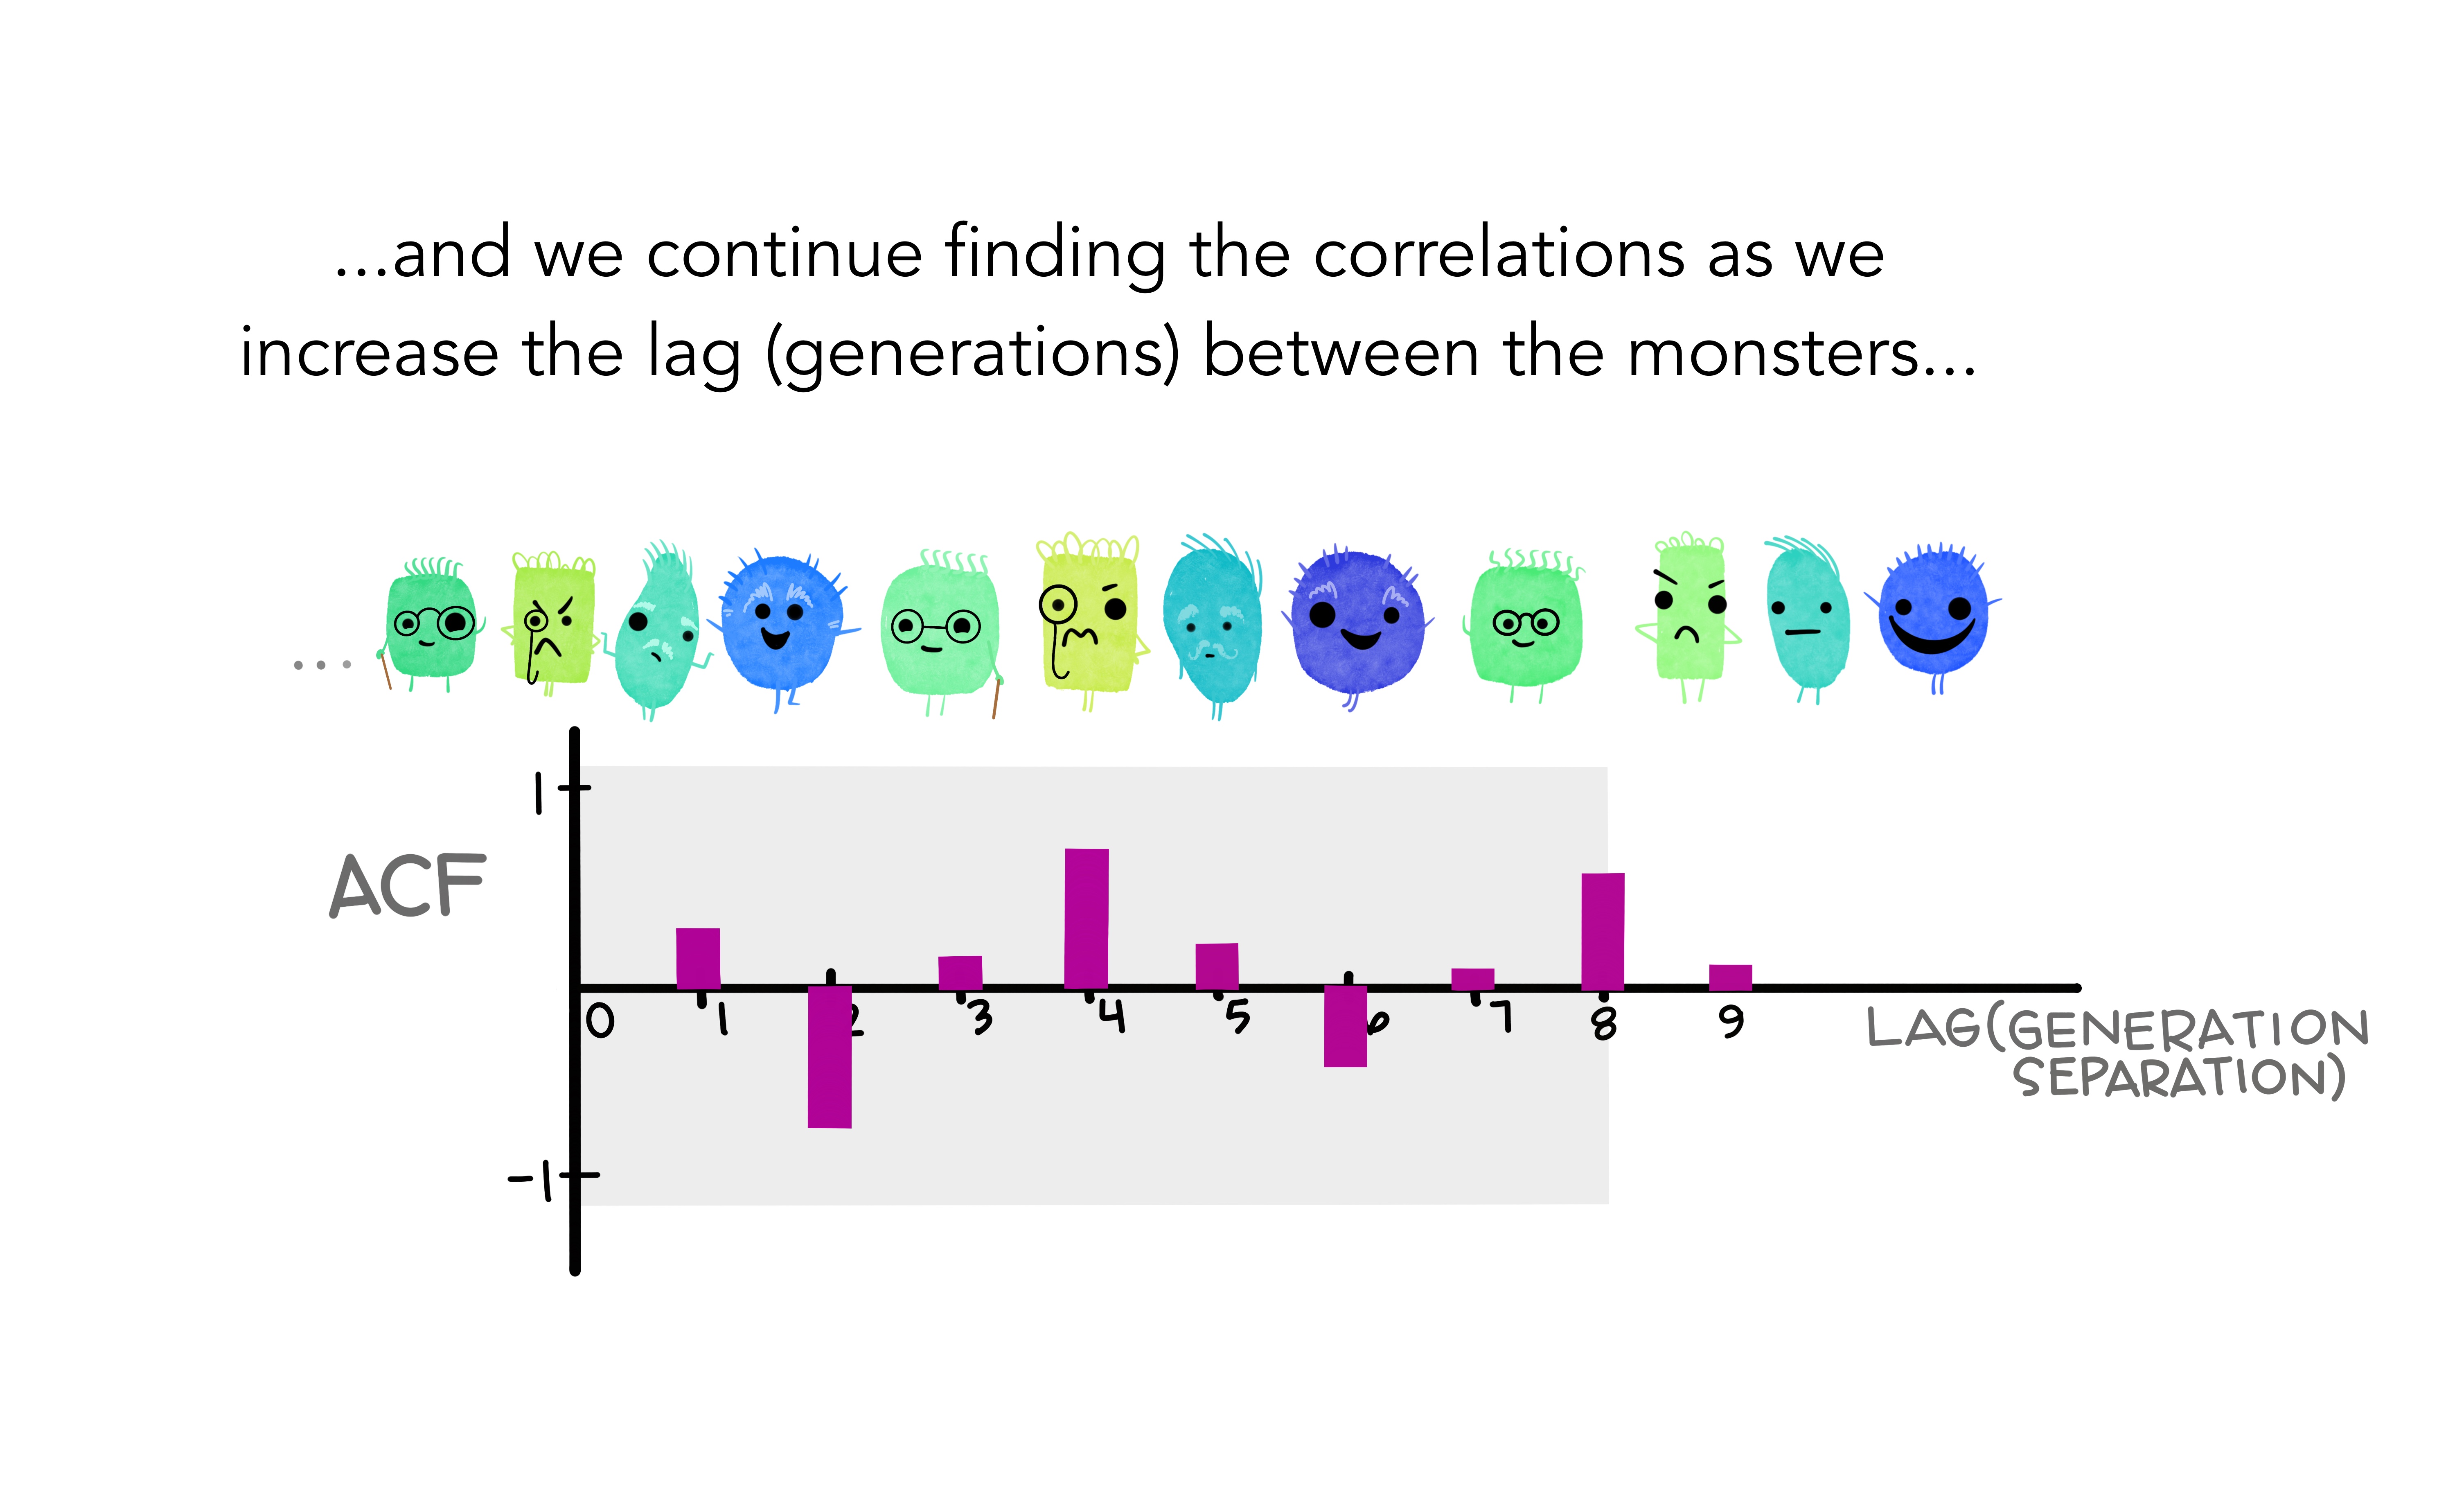 A long time series of friendly looking monsters representing generations of their family. Monsters separated by 4 generations are very similar, and those separated by 2 generations are very different. An autocorrelation function plot is show below the monsters, revealing positive correlations at lag = 4 and 8, negative correlations at lag = 2 and 5, and smaller positive correlations for other lags. The text reads “and we continue finding the correlations as we increase the lag (generations) between the monsters…